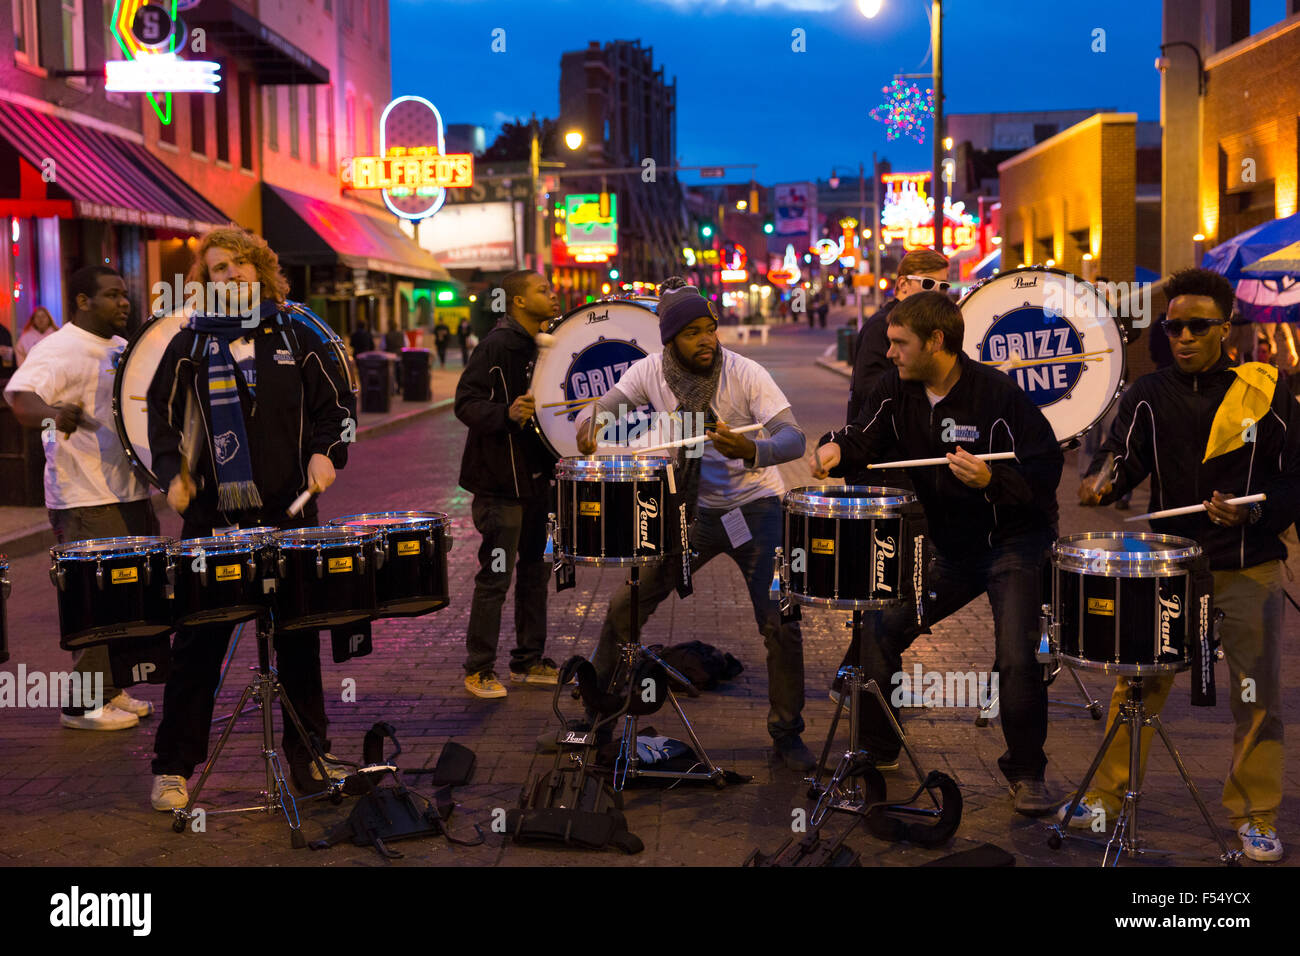 Grizz Line drummers and percussion band live in Beale Street entertainment district famous for Rock and Roll, Jazz and Blues Stock Photo